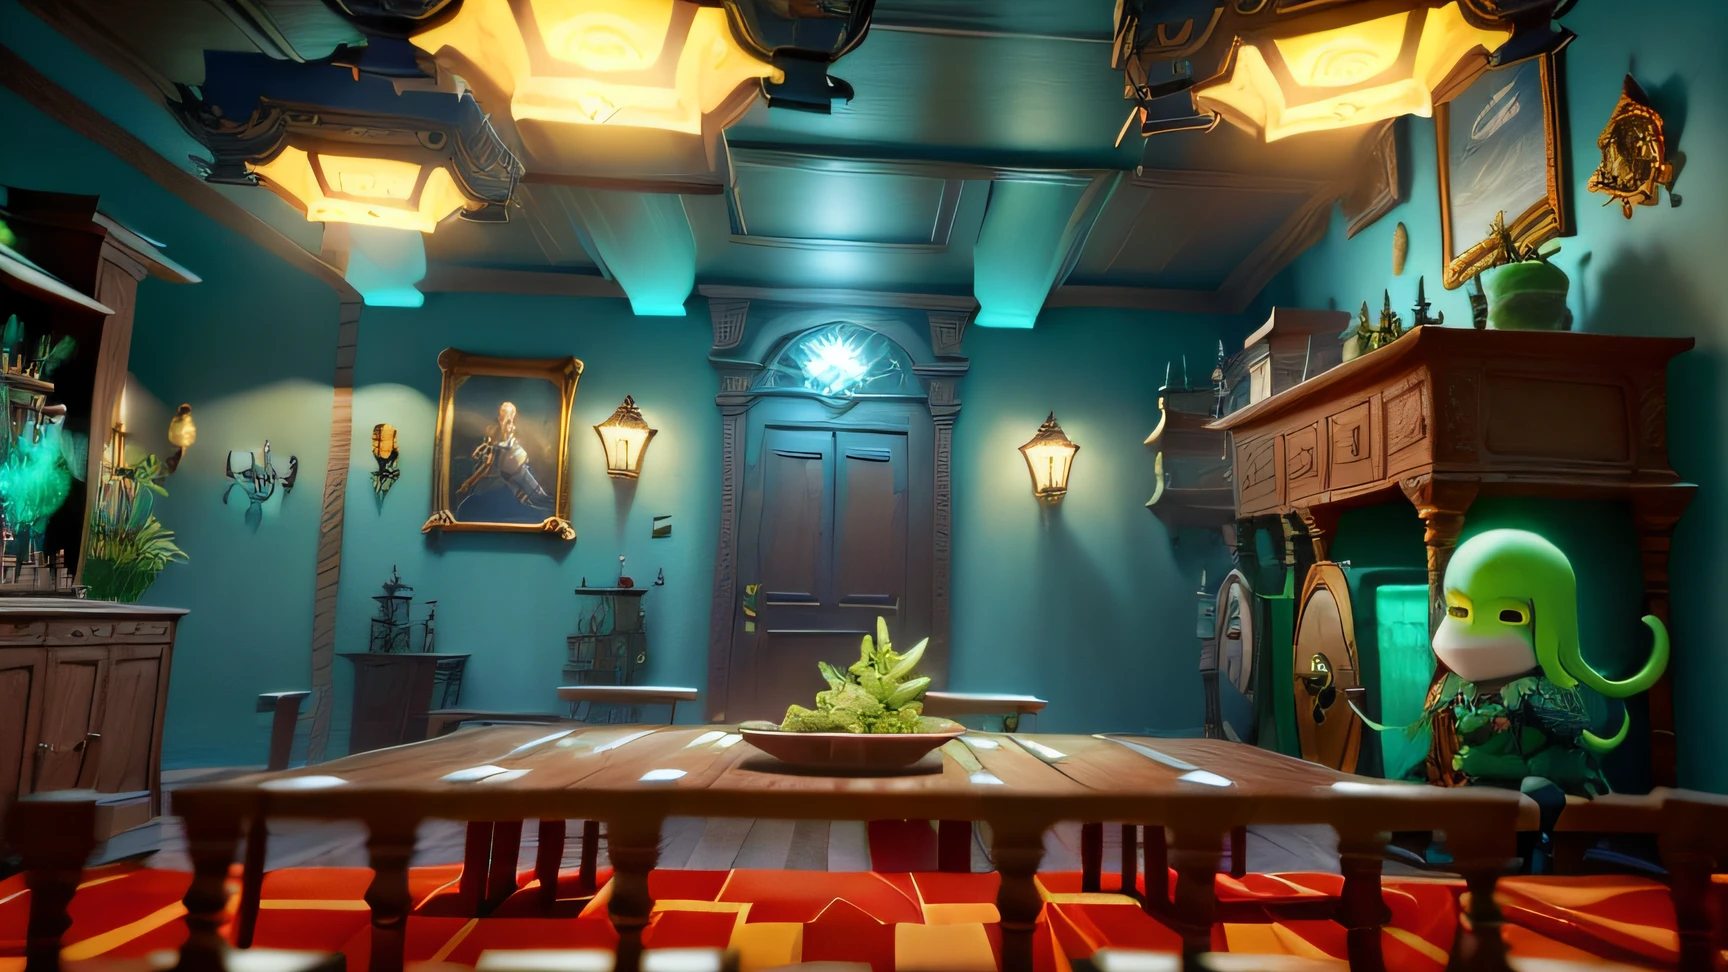 Bright room with checkered floor and table and chairs, interior gameplay screenshot, inside her surreal vr castle, pc screenshot, videogame screenshot>, rendered in nvidia's omniverse, screenshot from the game, video game still, high quality screenshot, ((bob esponja)), na screenshot from the game, gameplay still, screenshot from the game, ((Bob Esponja)) Cthulhu Nightmare, videogame screenshot, tear